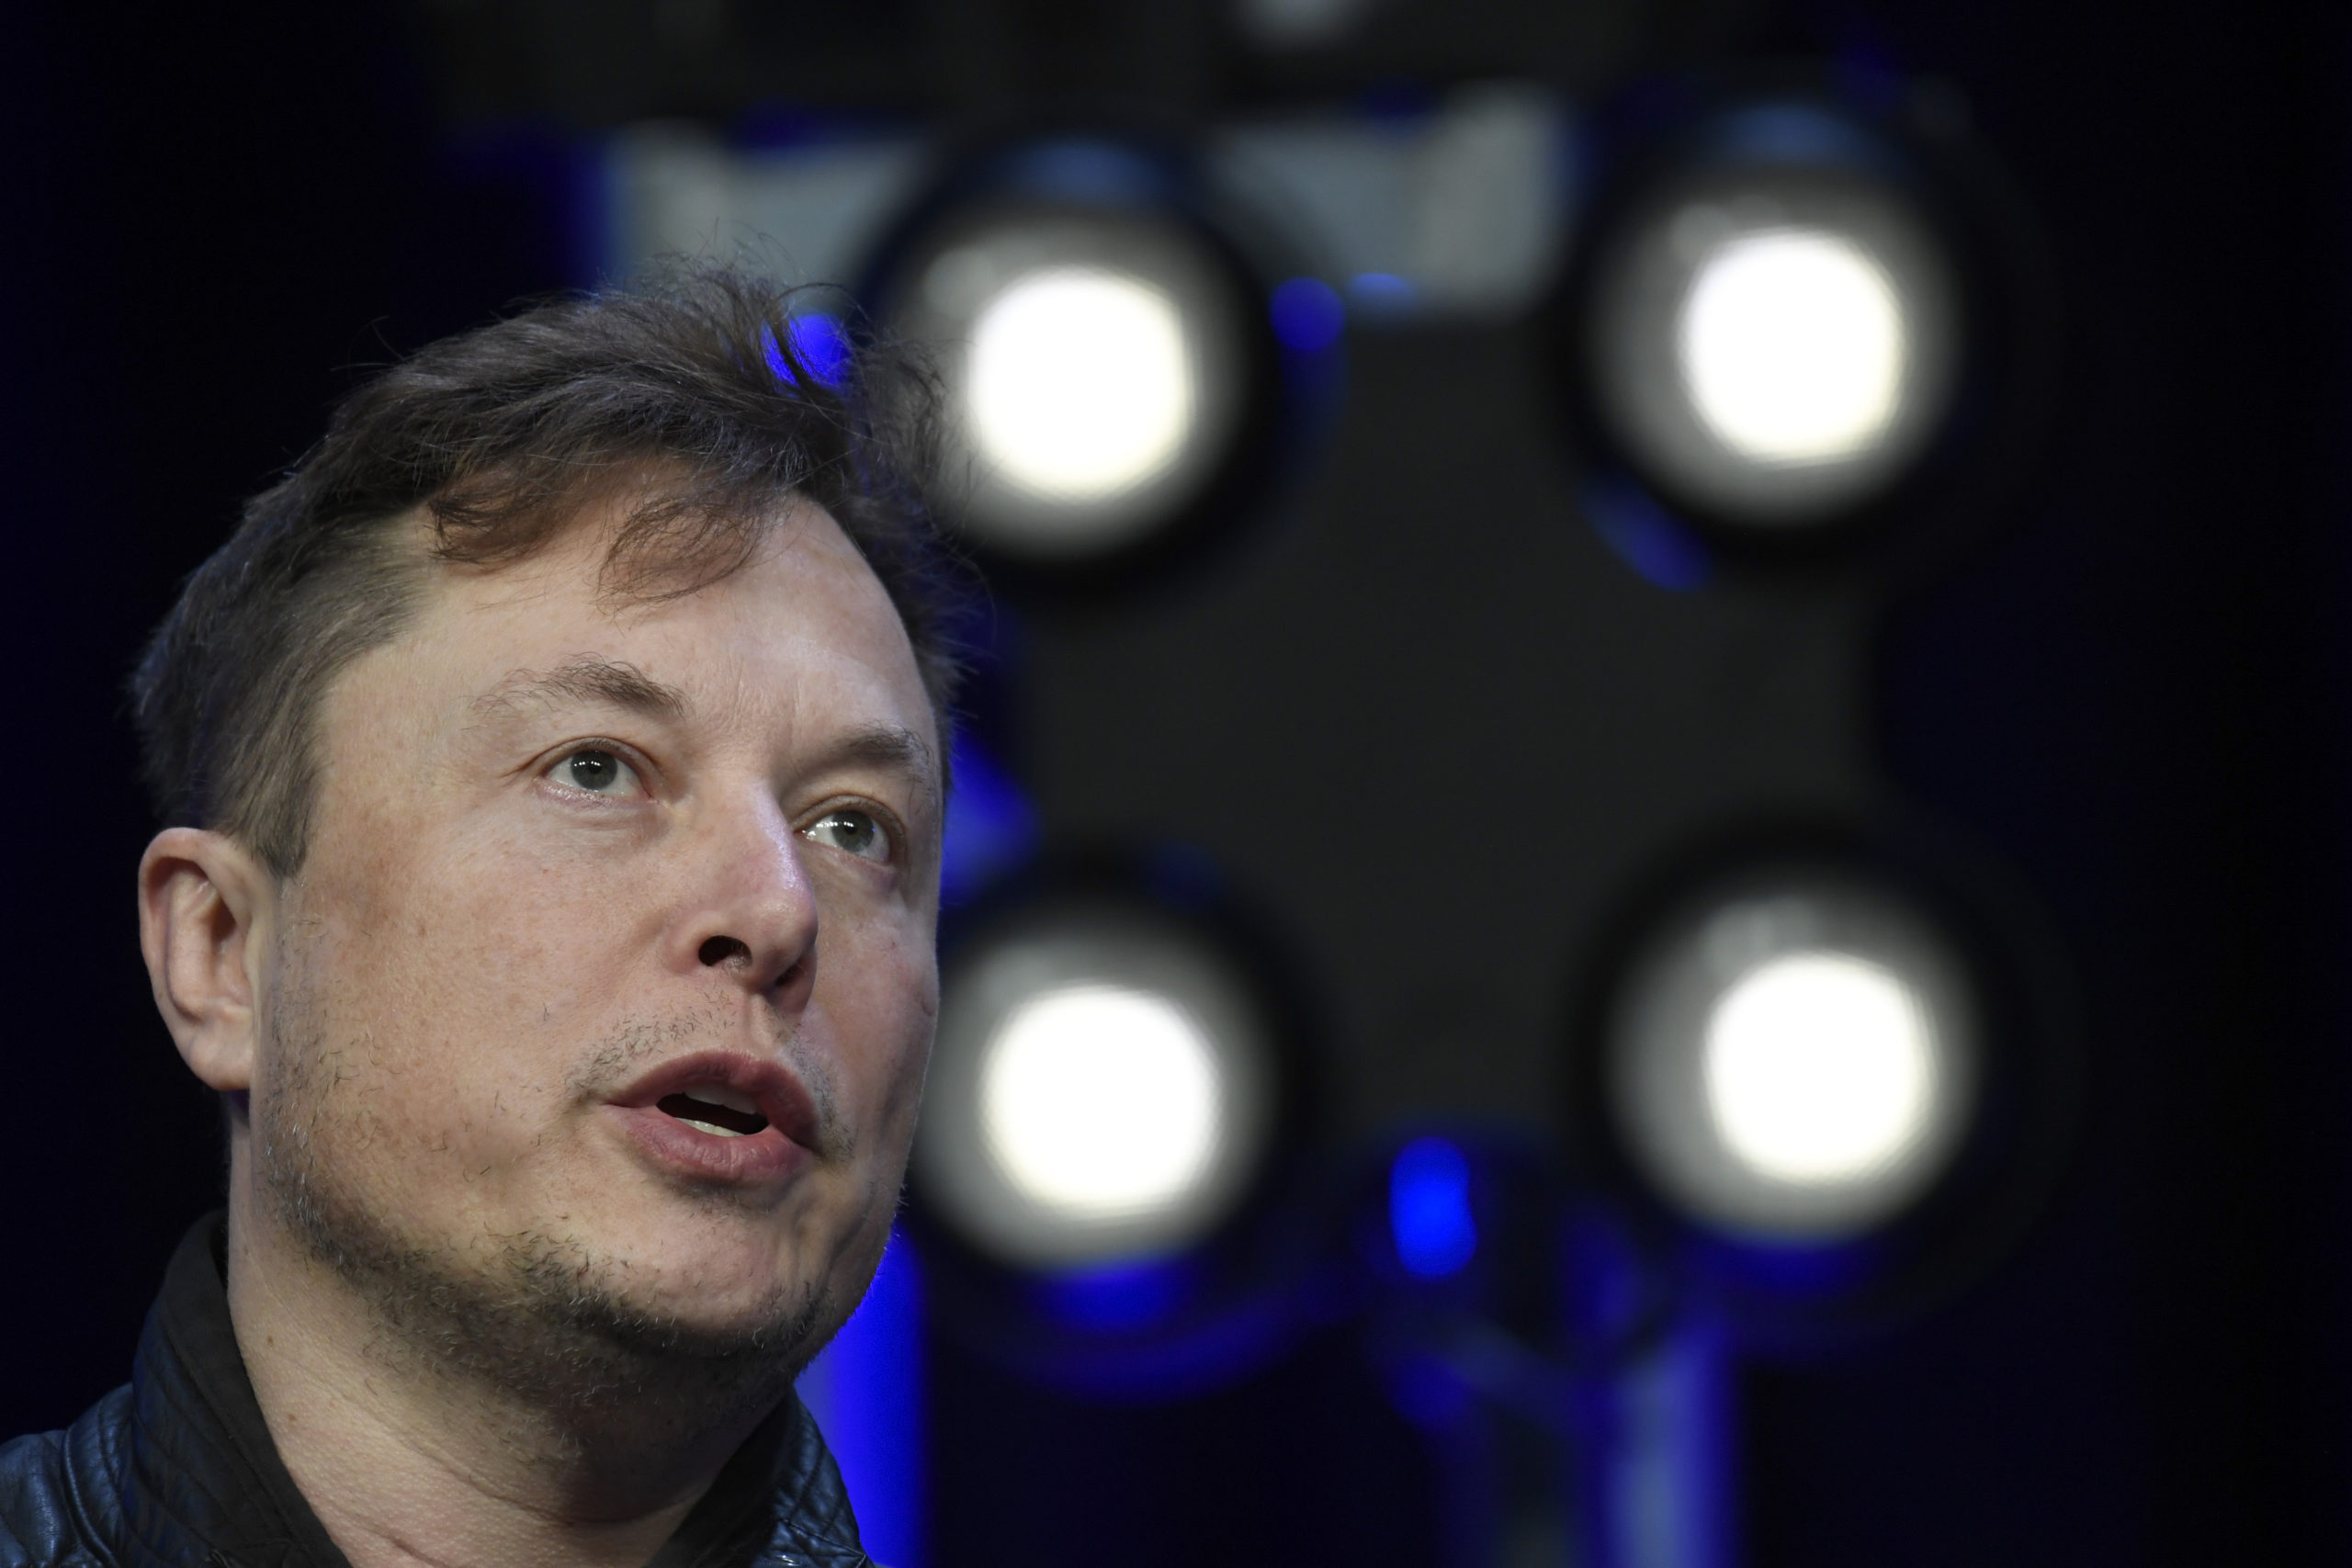 Tesla CEO Elon Musk speaks at a conference in Washington, D.C., on March 9. Musk and representatives of social media giant Twitter are due in court in October for a trial that will decide whether the world's richest man will be forced to complete his agreed-to $44 billion acquisition of Twitter.